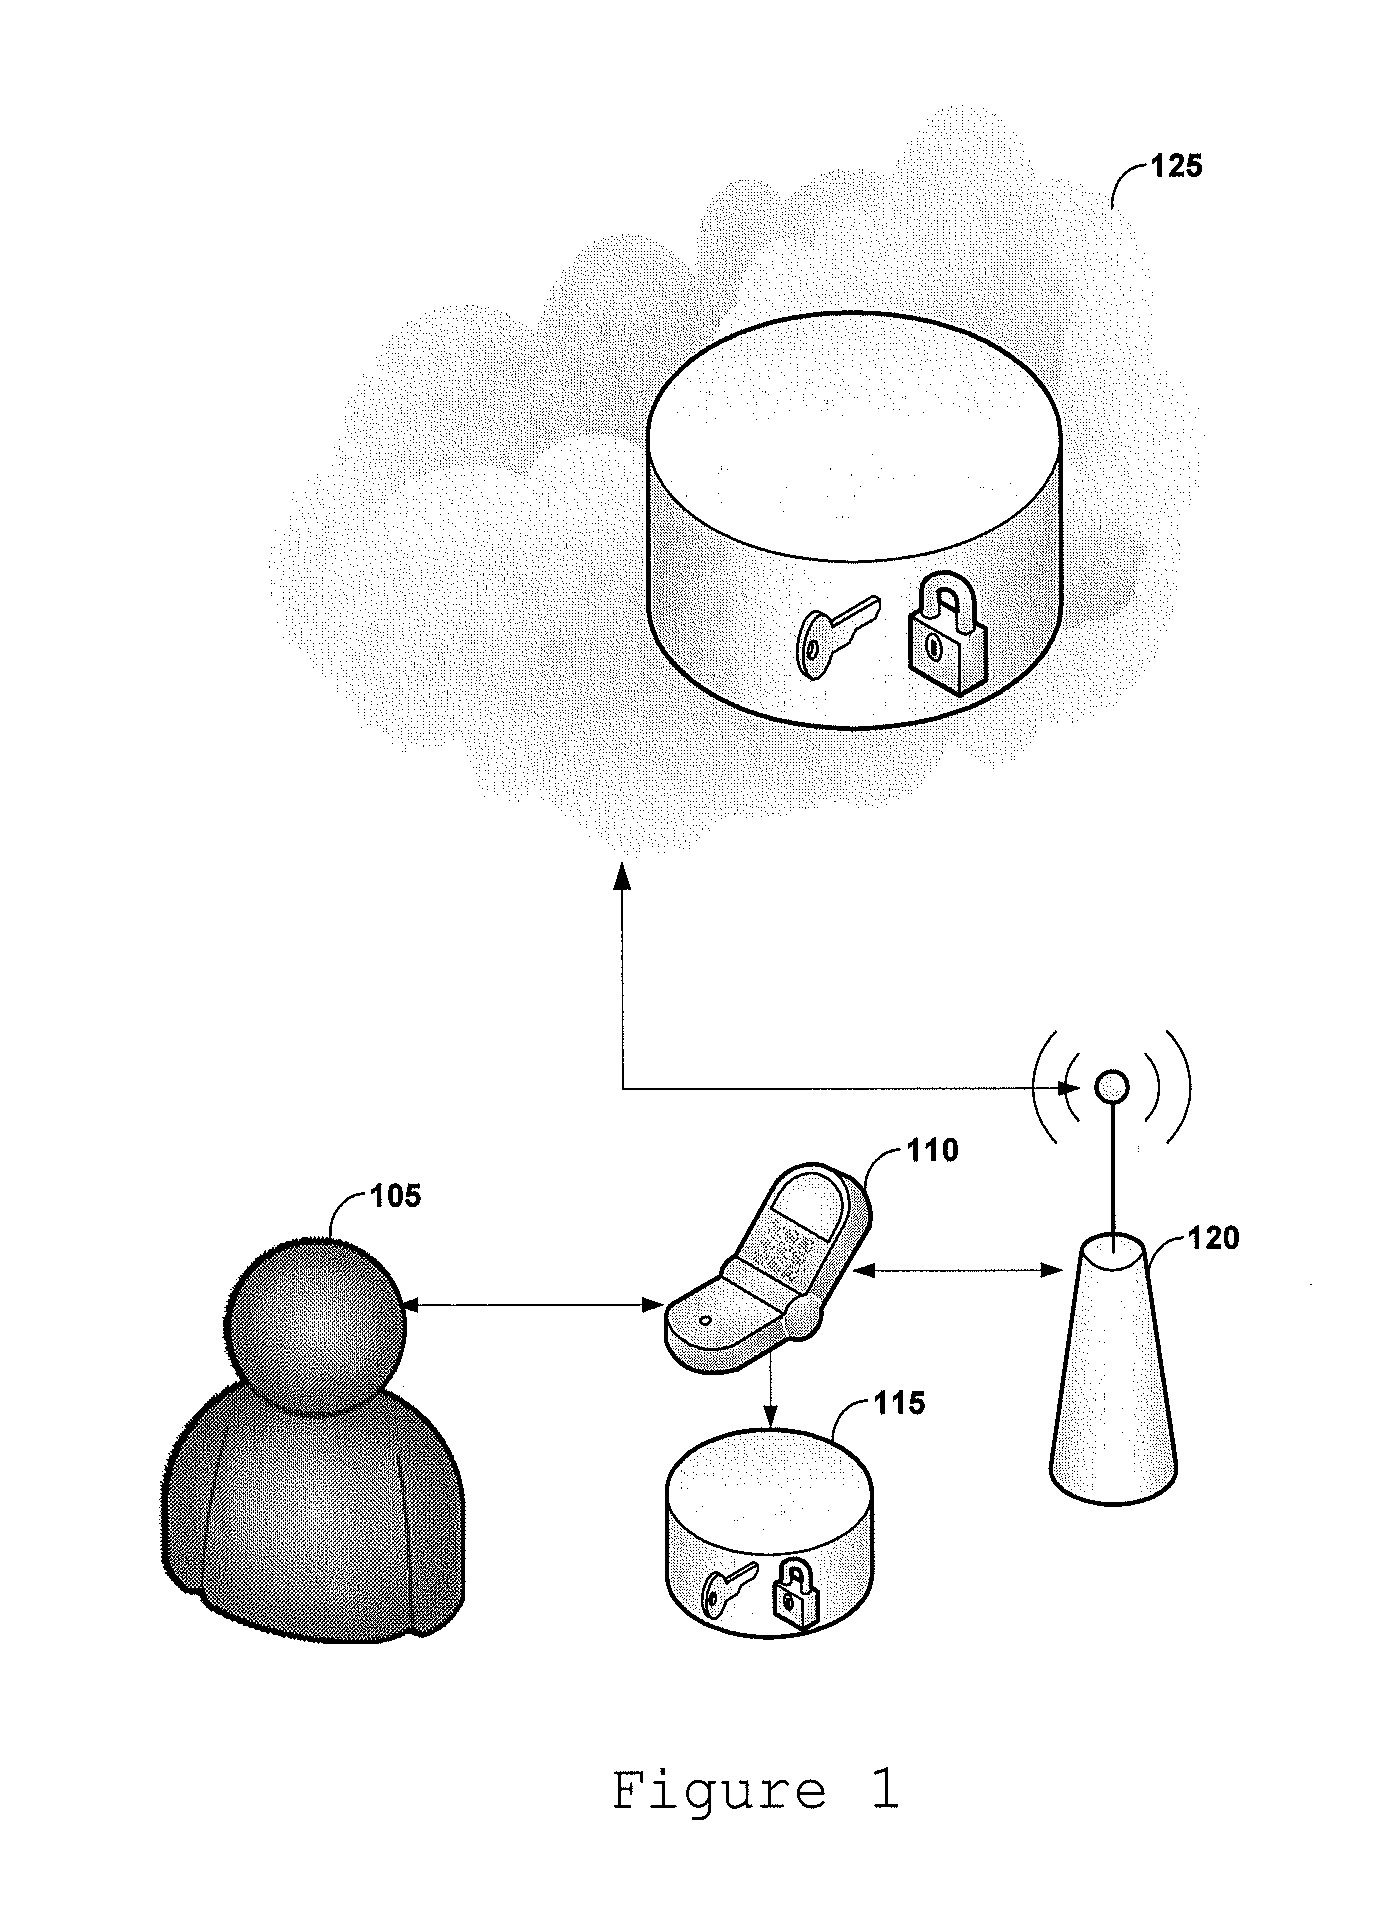 Secure storage system for distributed data